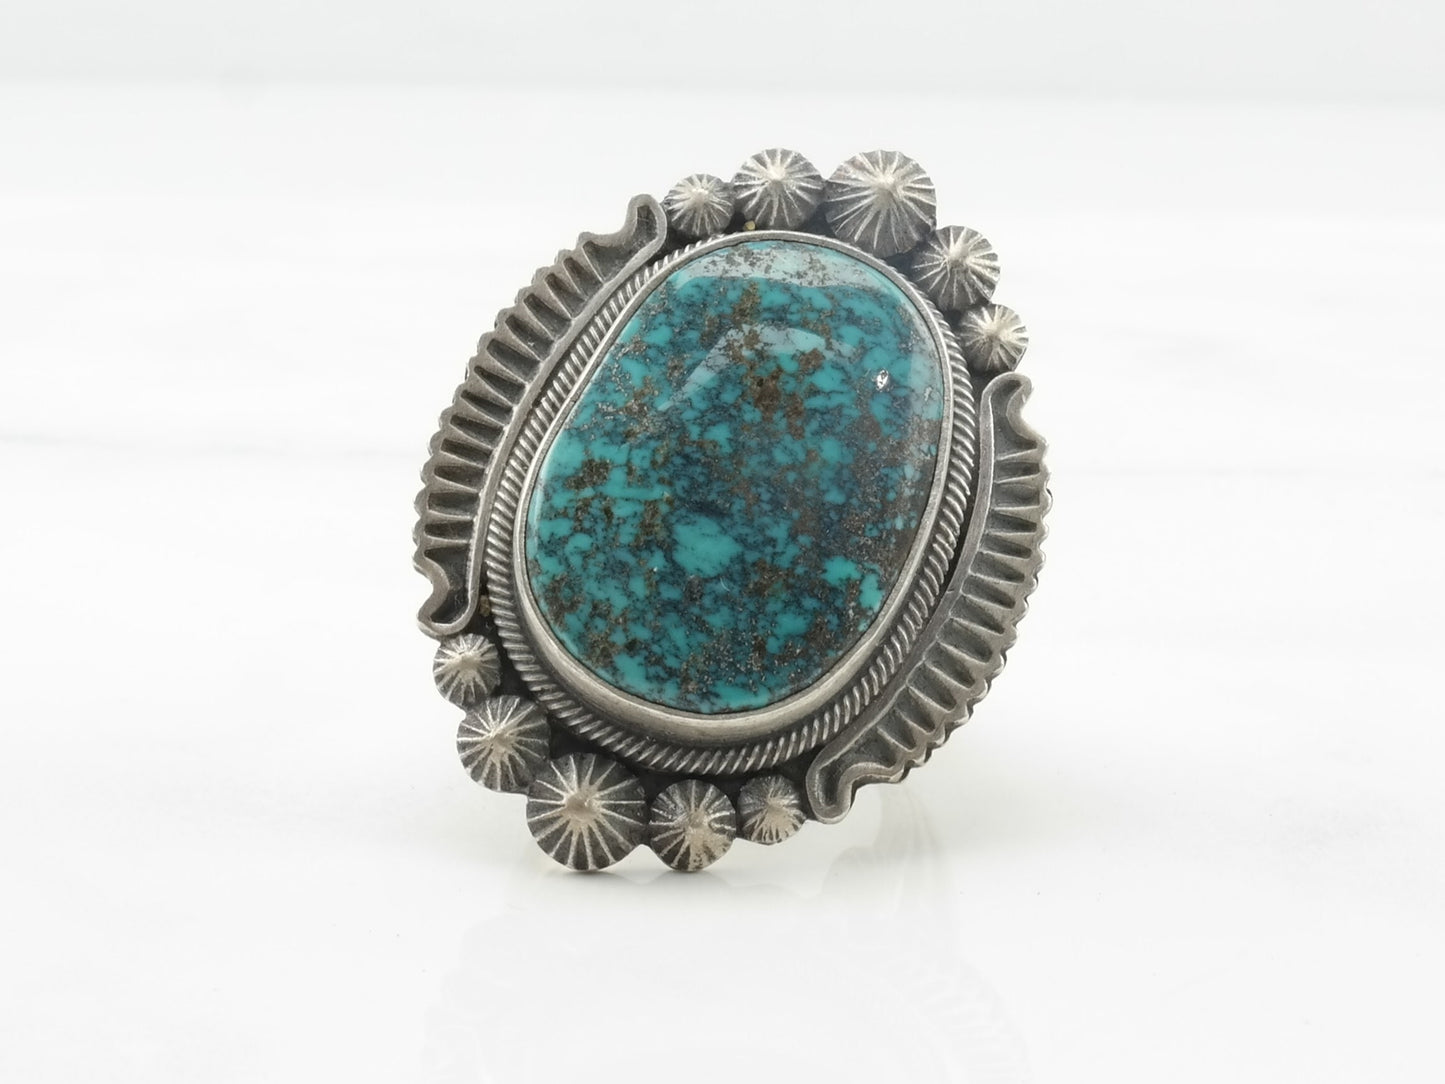 Vintage Navajo Silver Ring Turquoise Spiderweb Sterling Blue Size 8 3/4